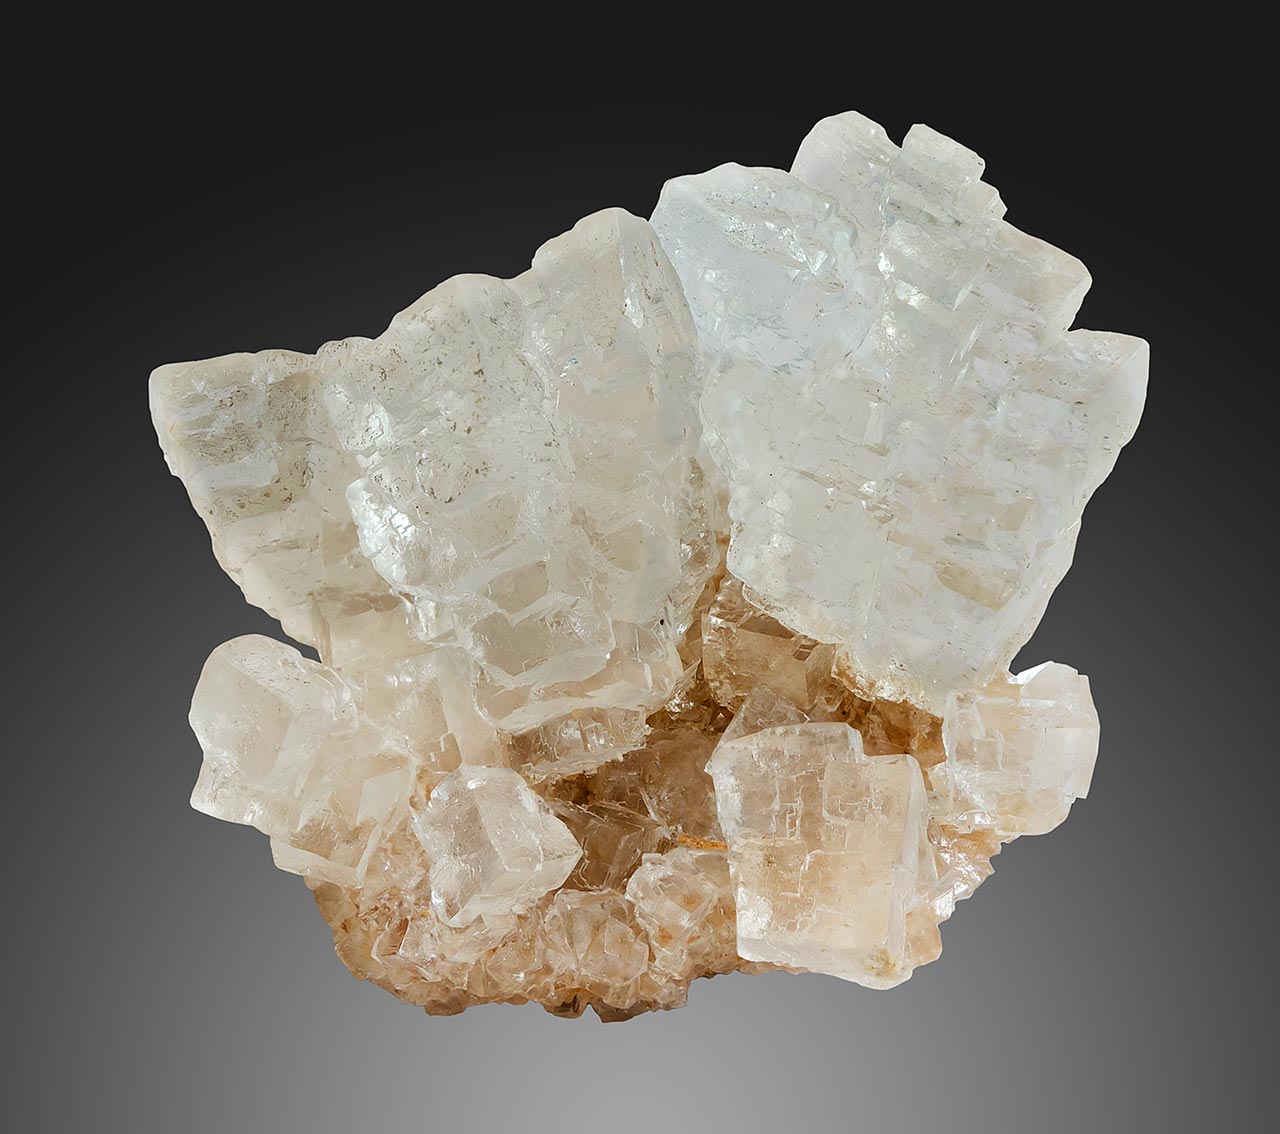 Skeletal halite crystals from Inowroclaw, Poland